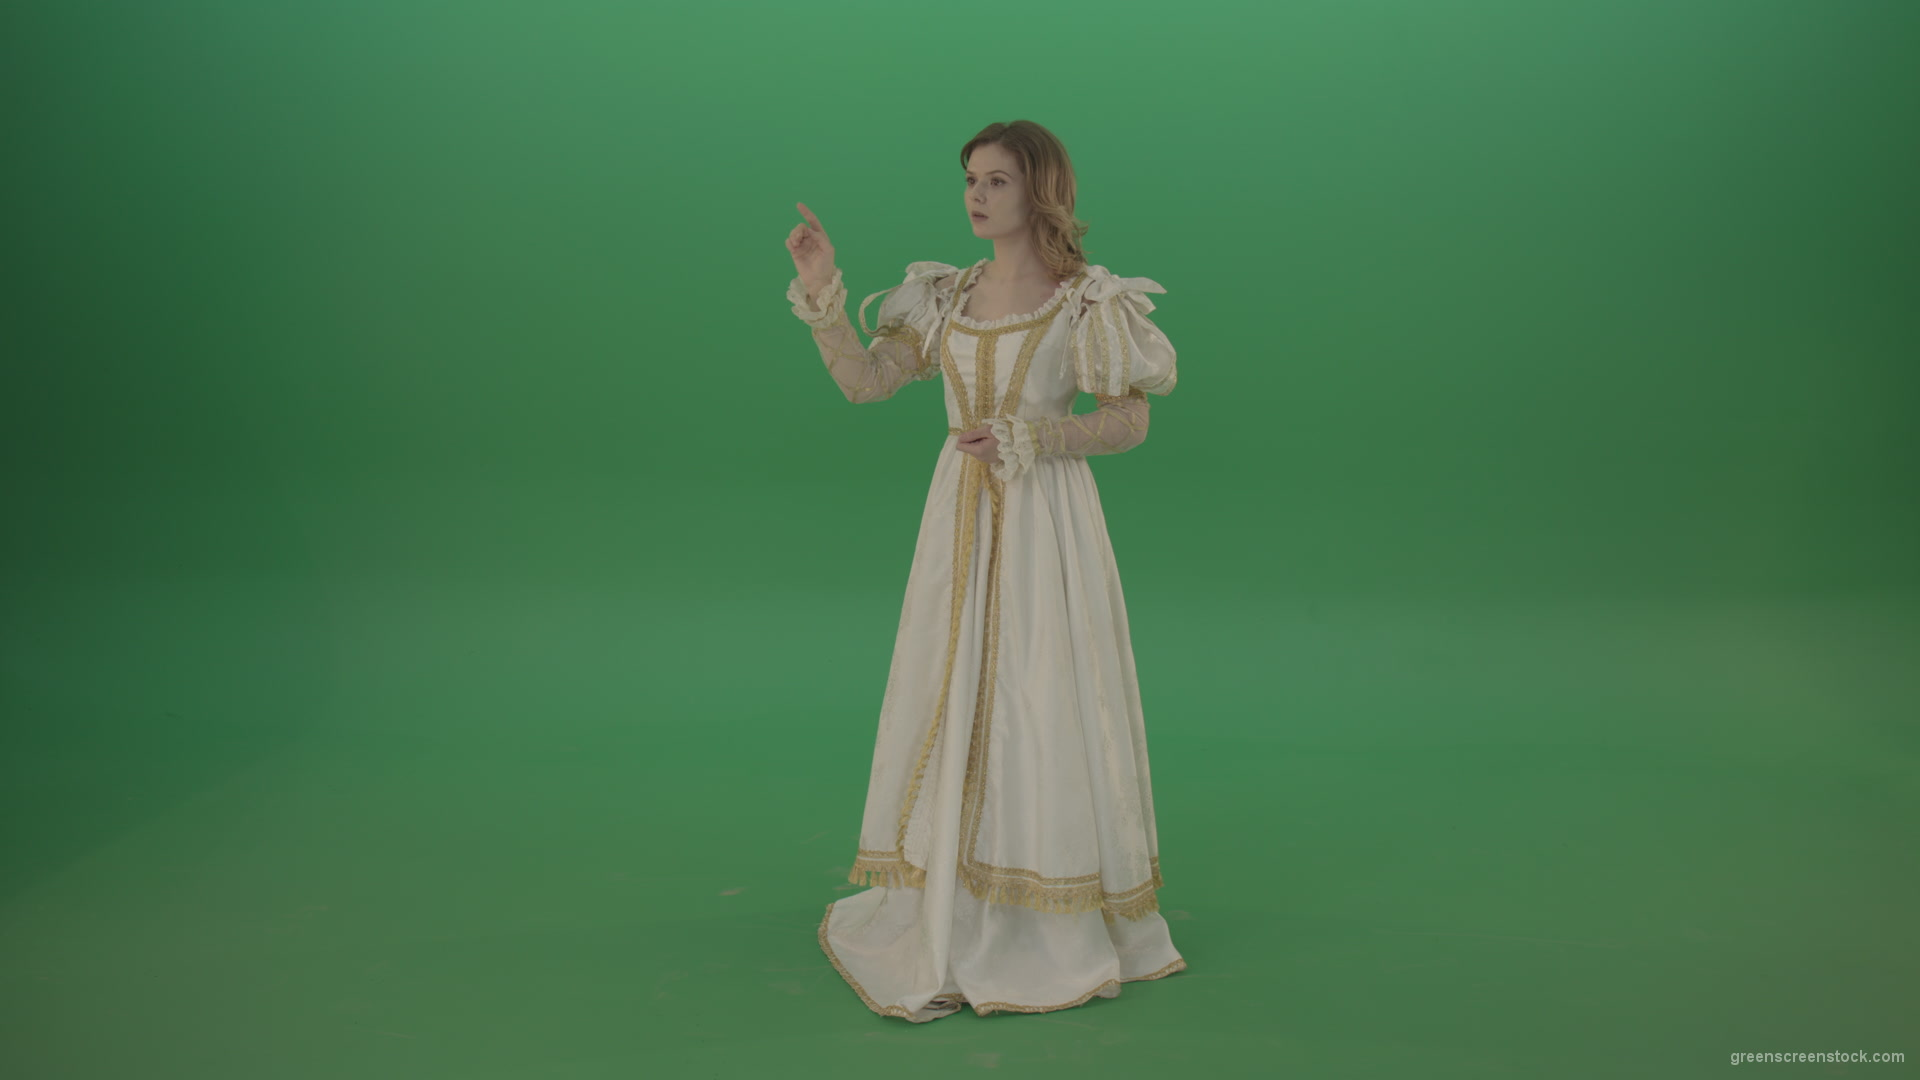 Flips-the-touchscreen-princess-in-a-white-dress-isolated-on-green-screen_005 Green Screen Stock